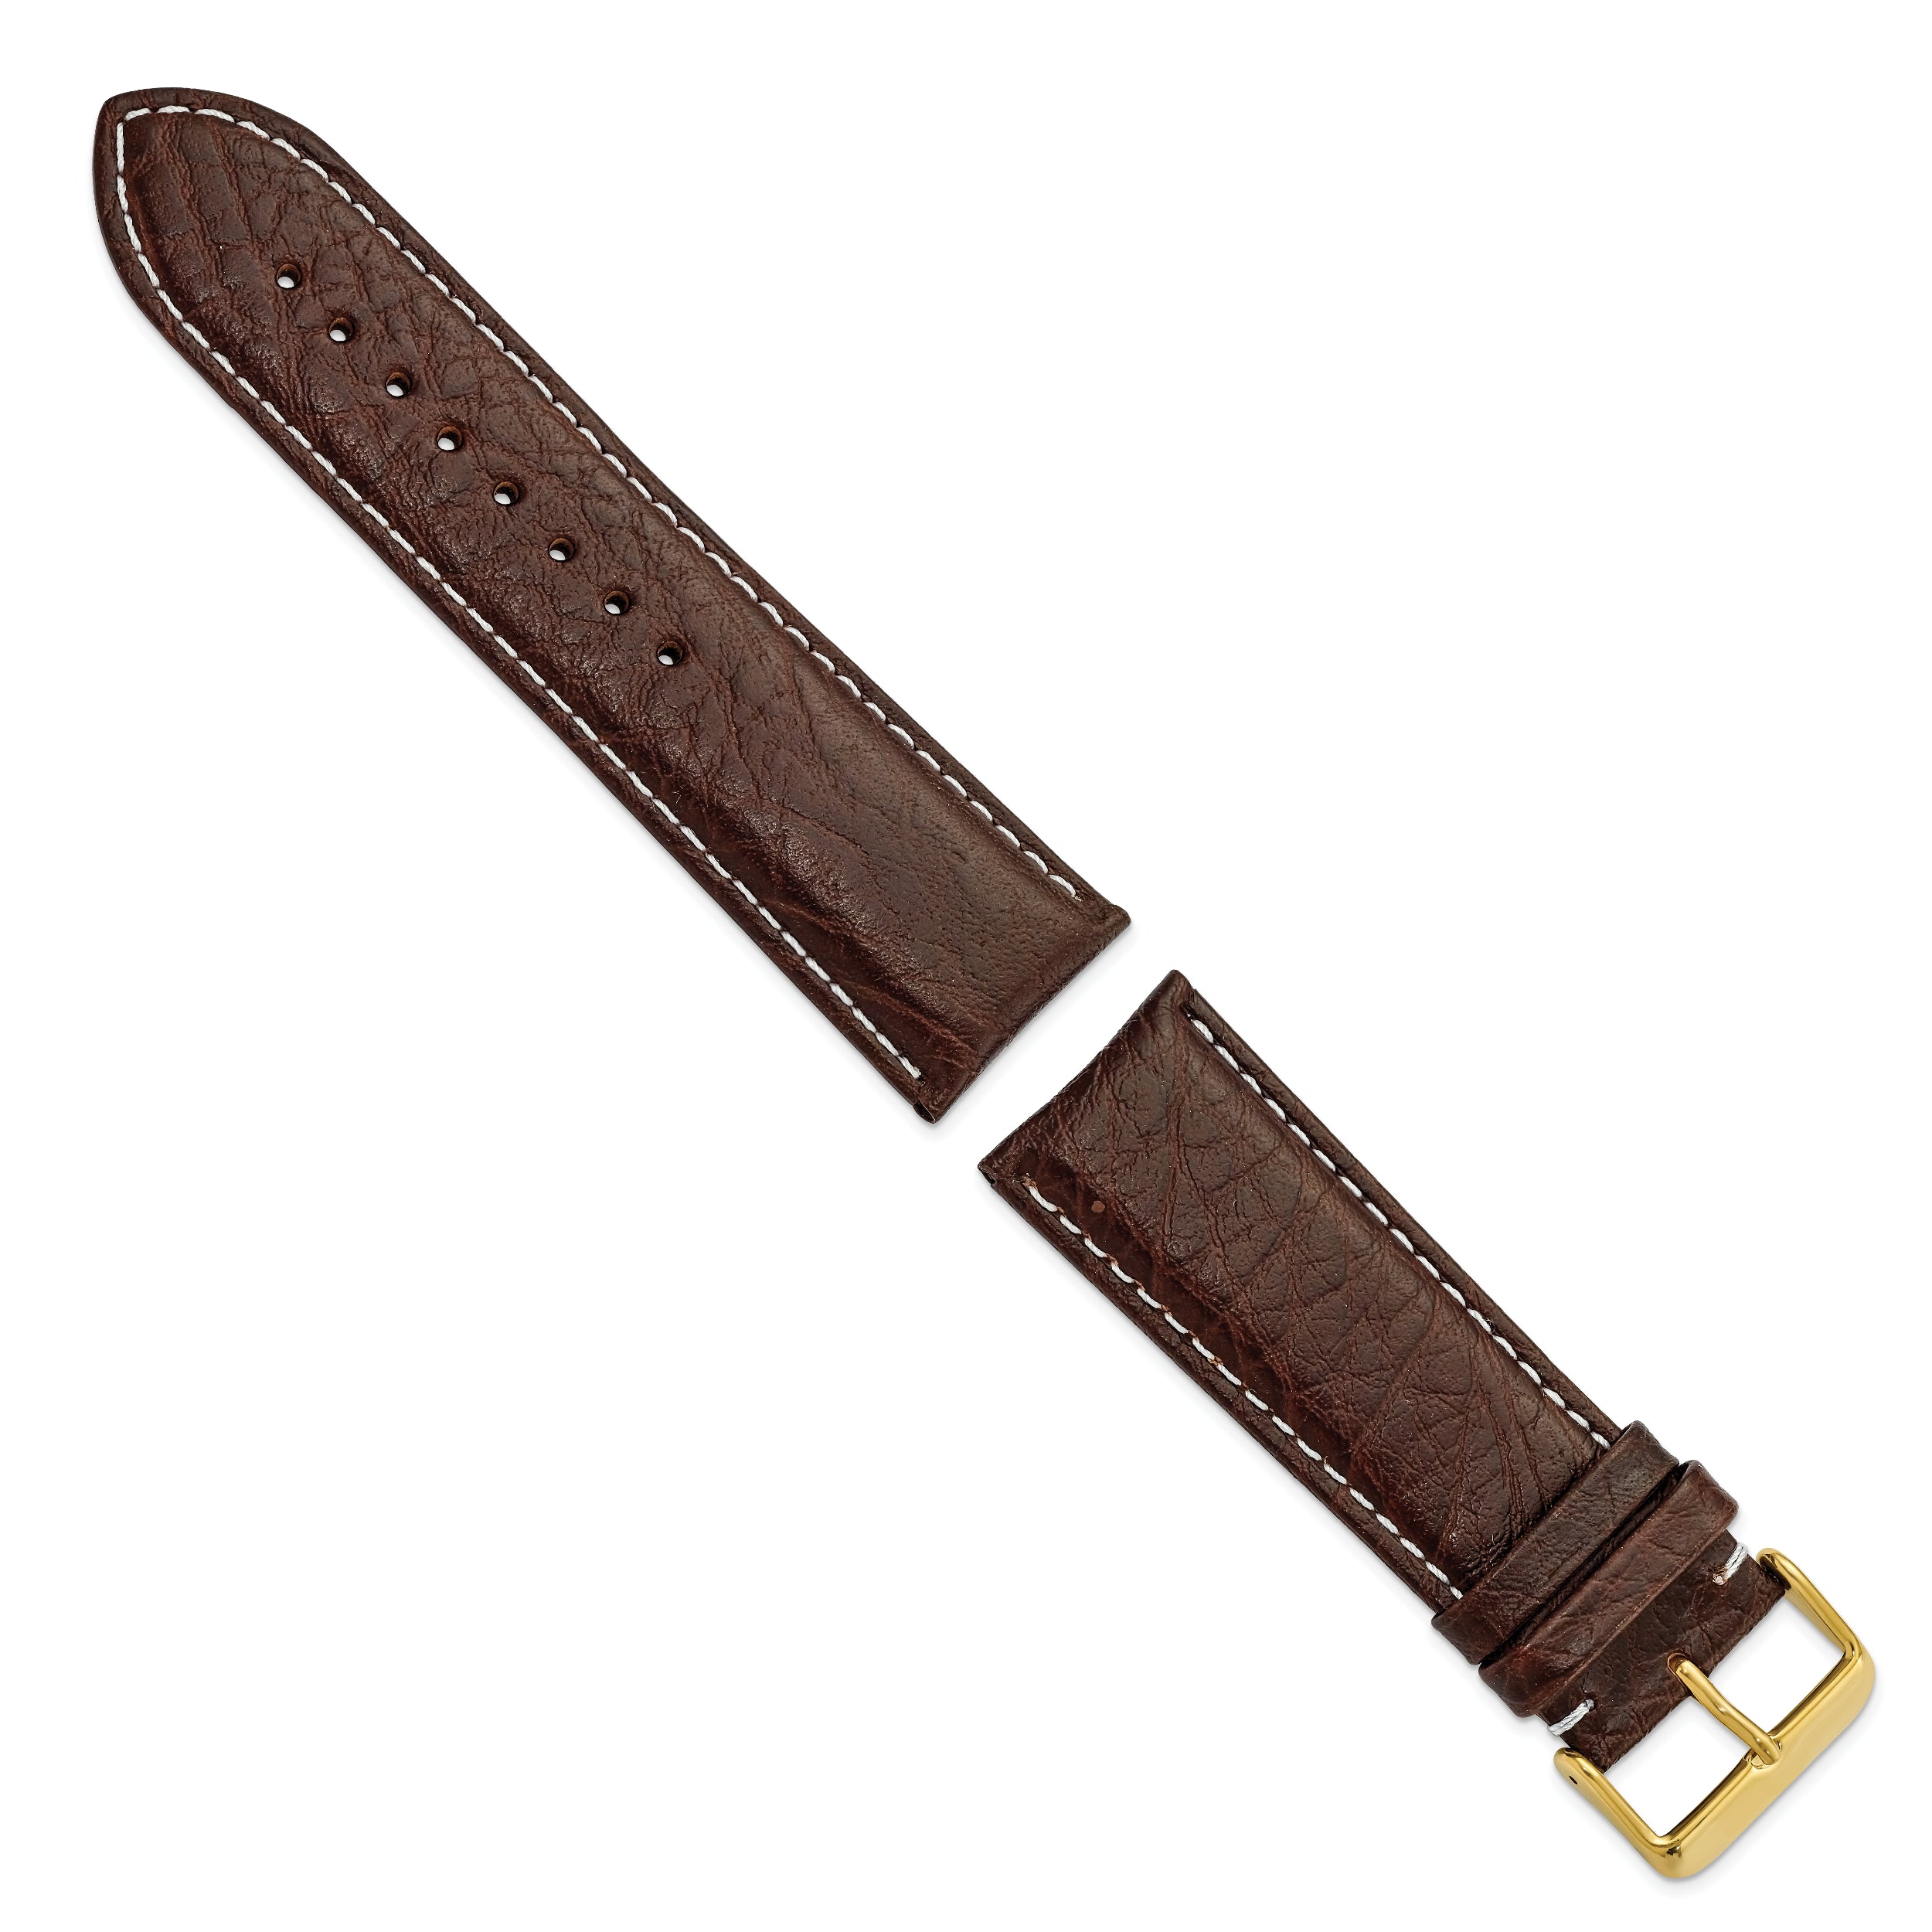 12mm Dark Brown Sport Leather with White Stitching and Gold-tone Buckle 6.75 inch Watch Band